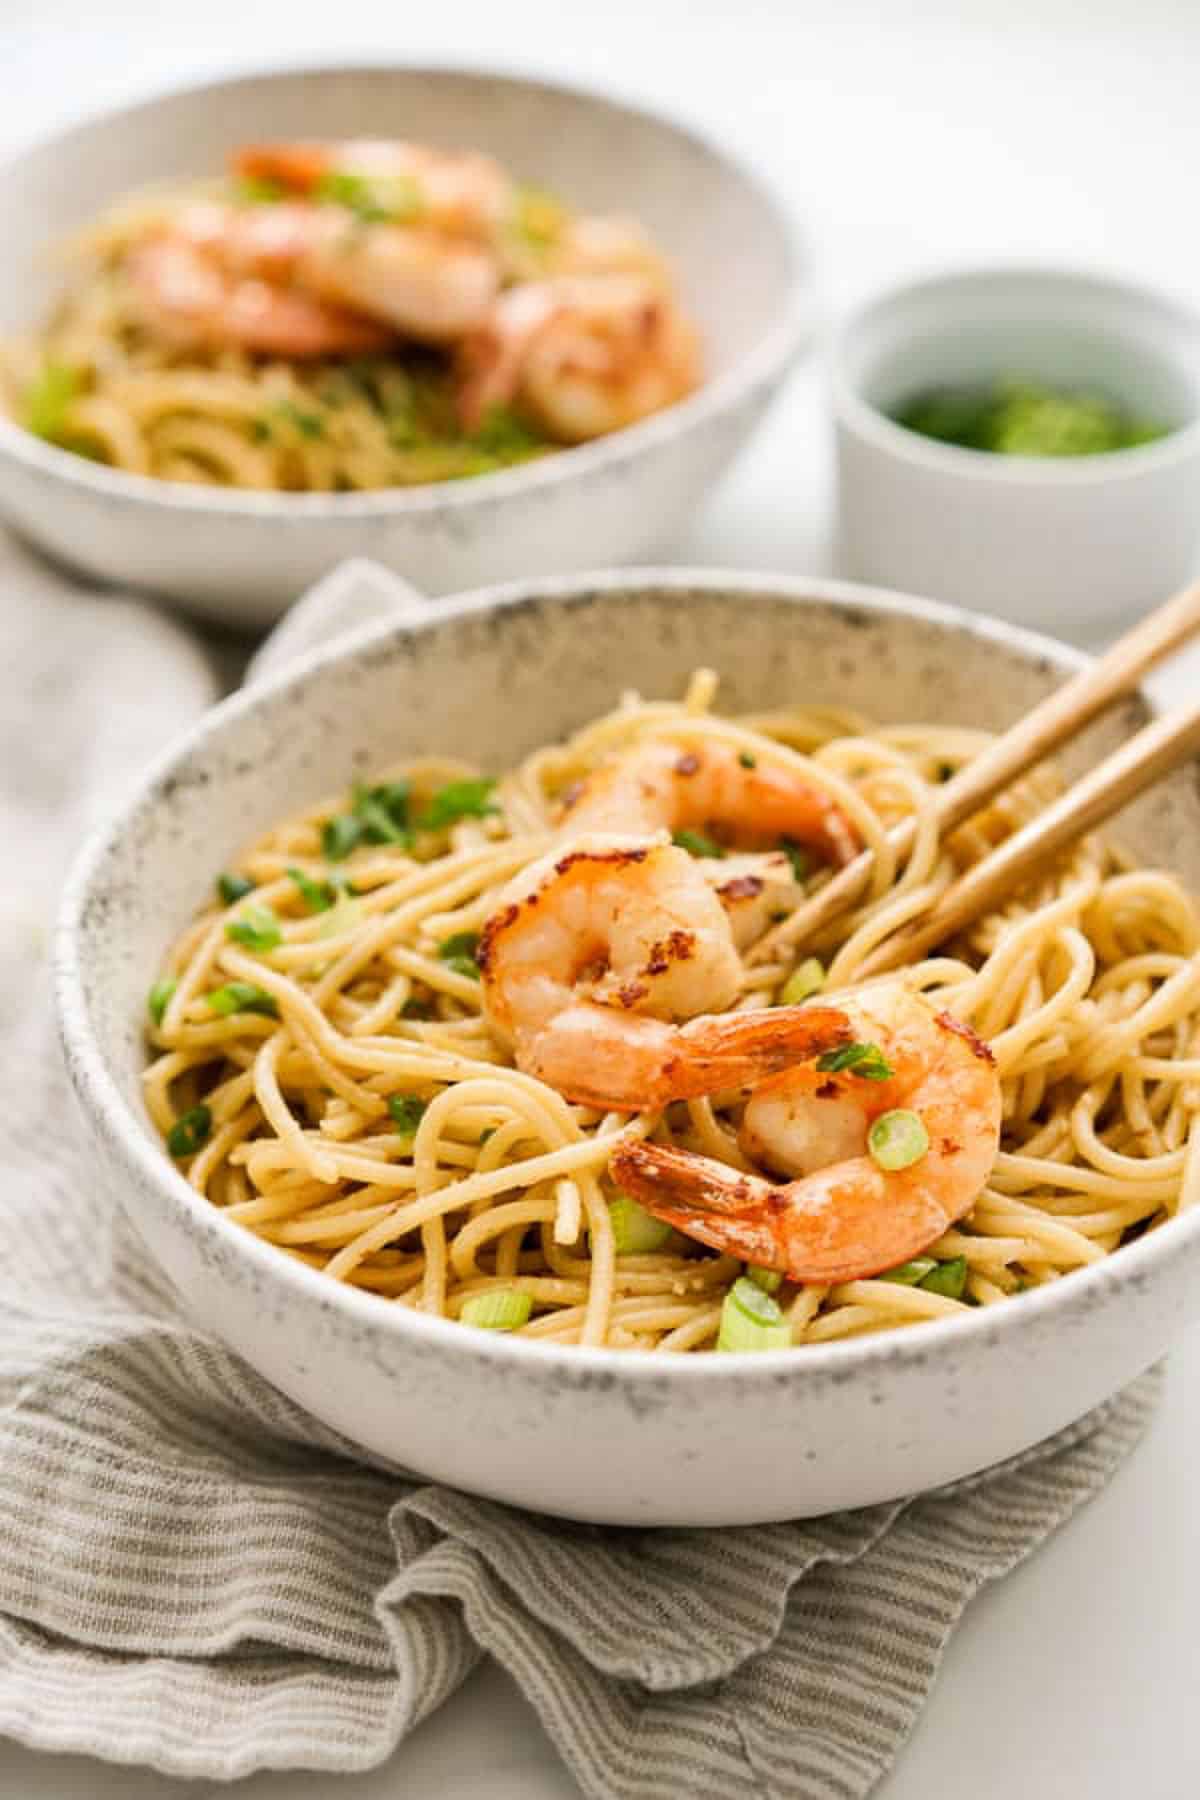 Garlic noodles with shrimp on top with chopsticks in a white bowl and another bowl in the background on top of a linen napkin.